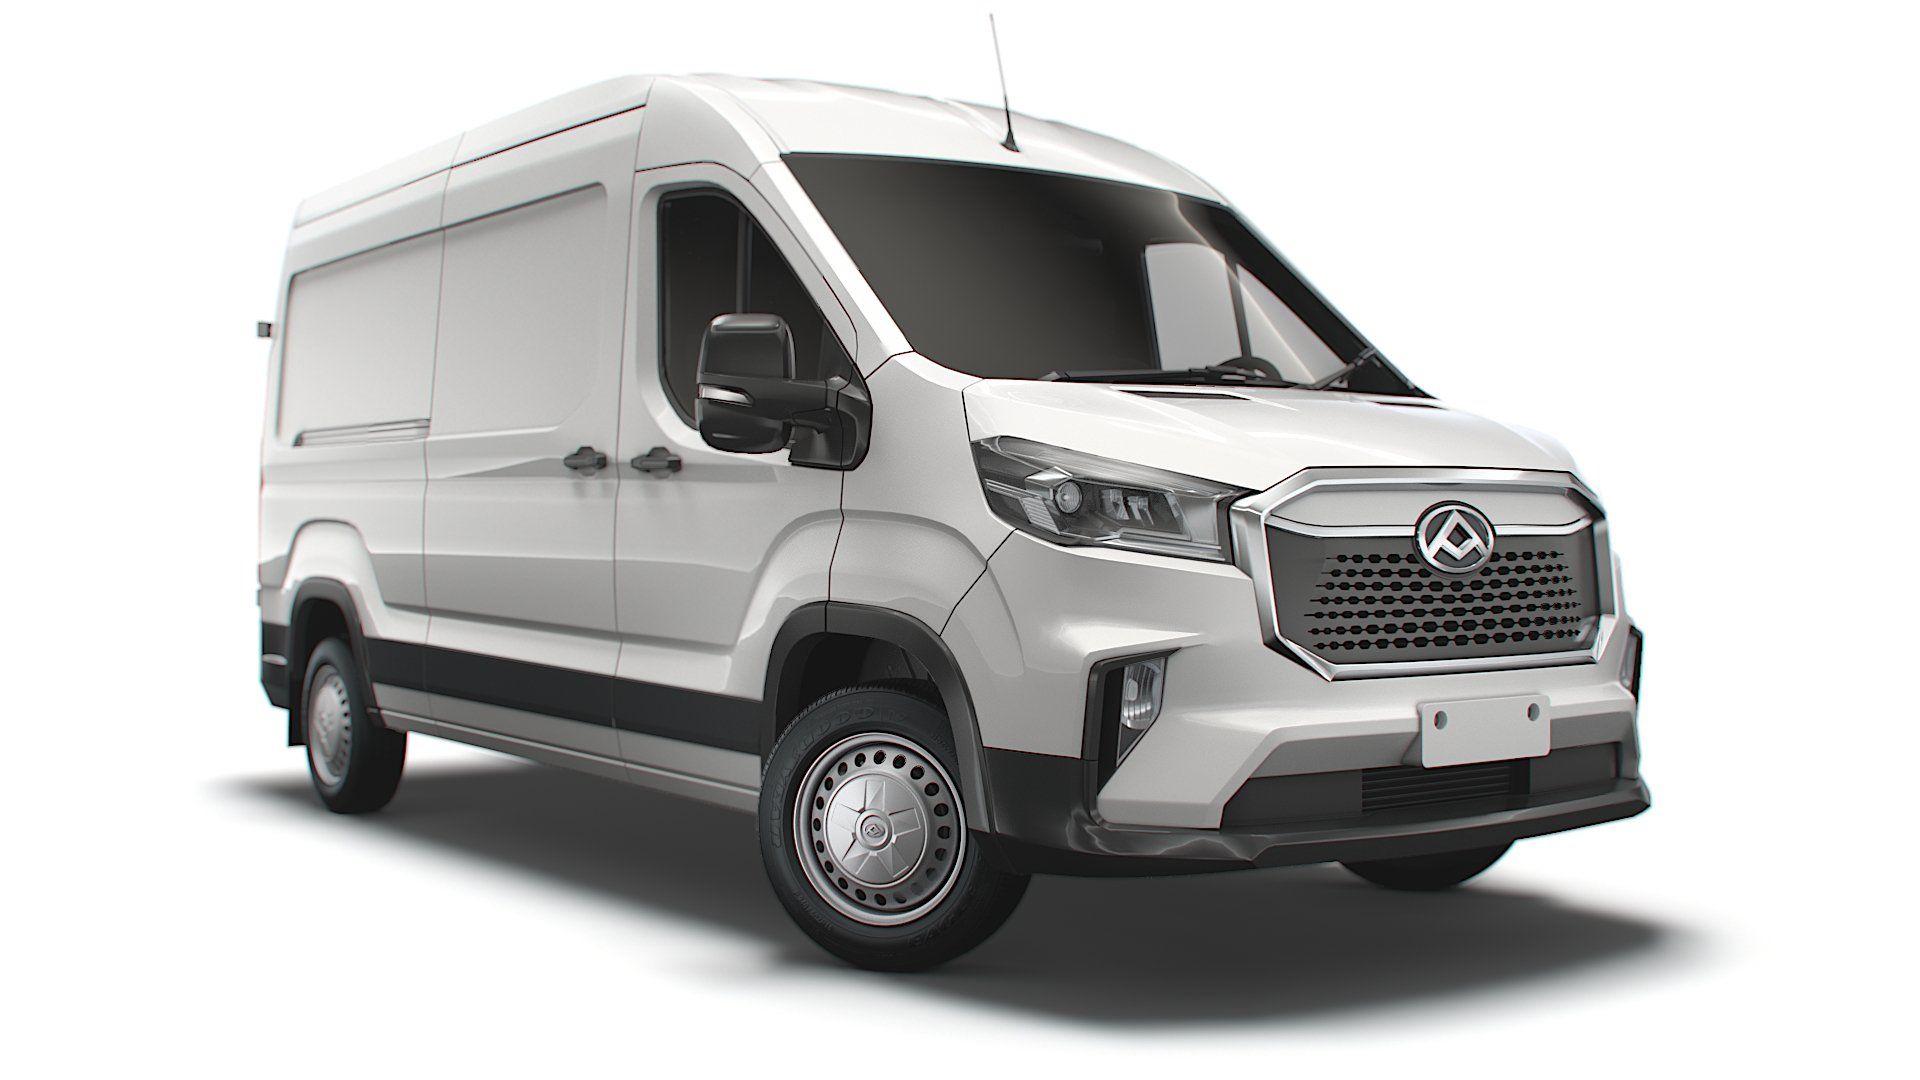 a white Maxxus eDeliver 9 electric van is shown on a white background.